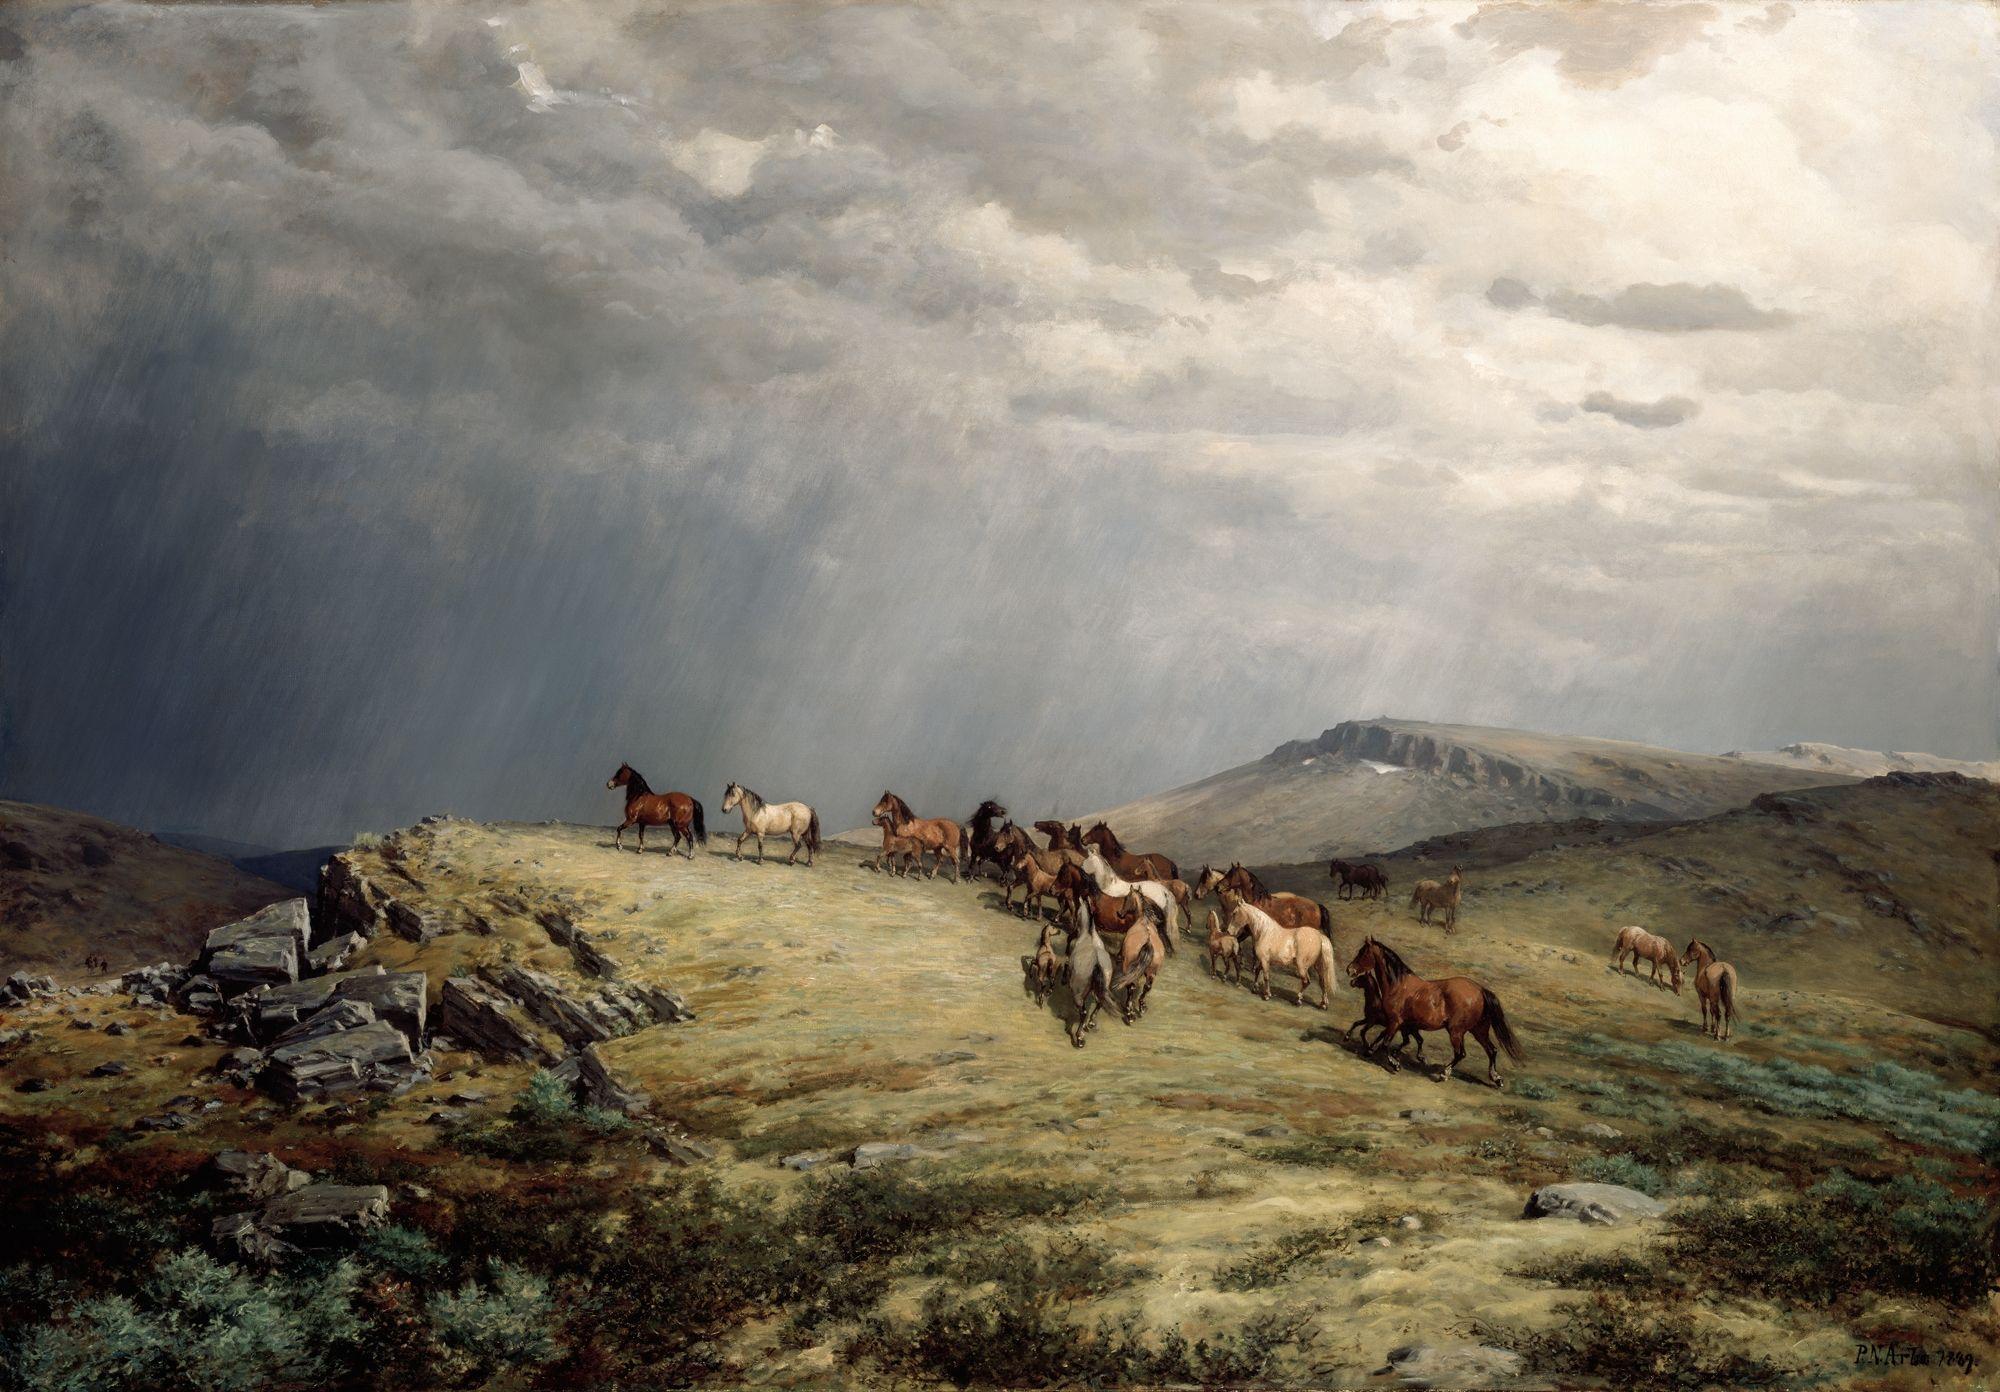 A field of horses travel across a dark field lit up by the sun leaking through clouds.